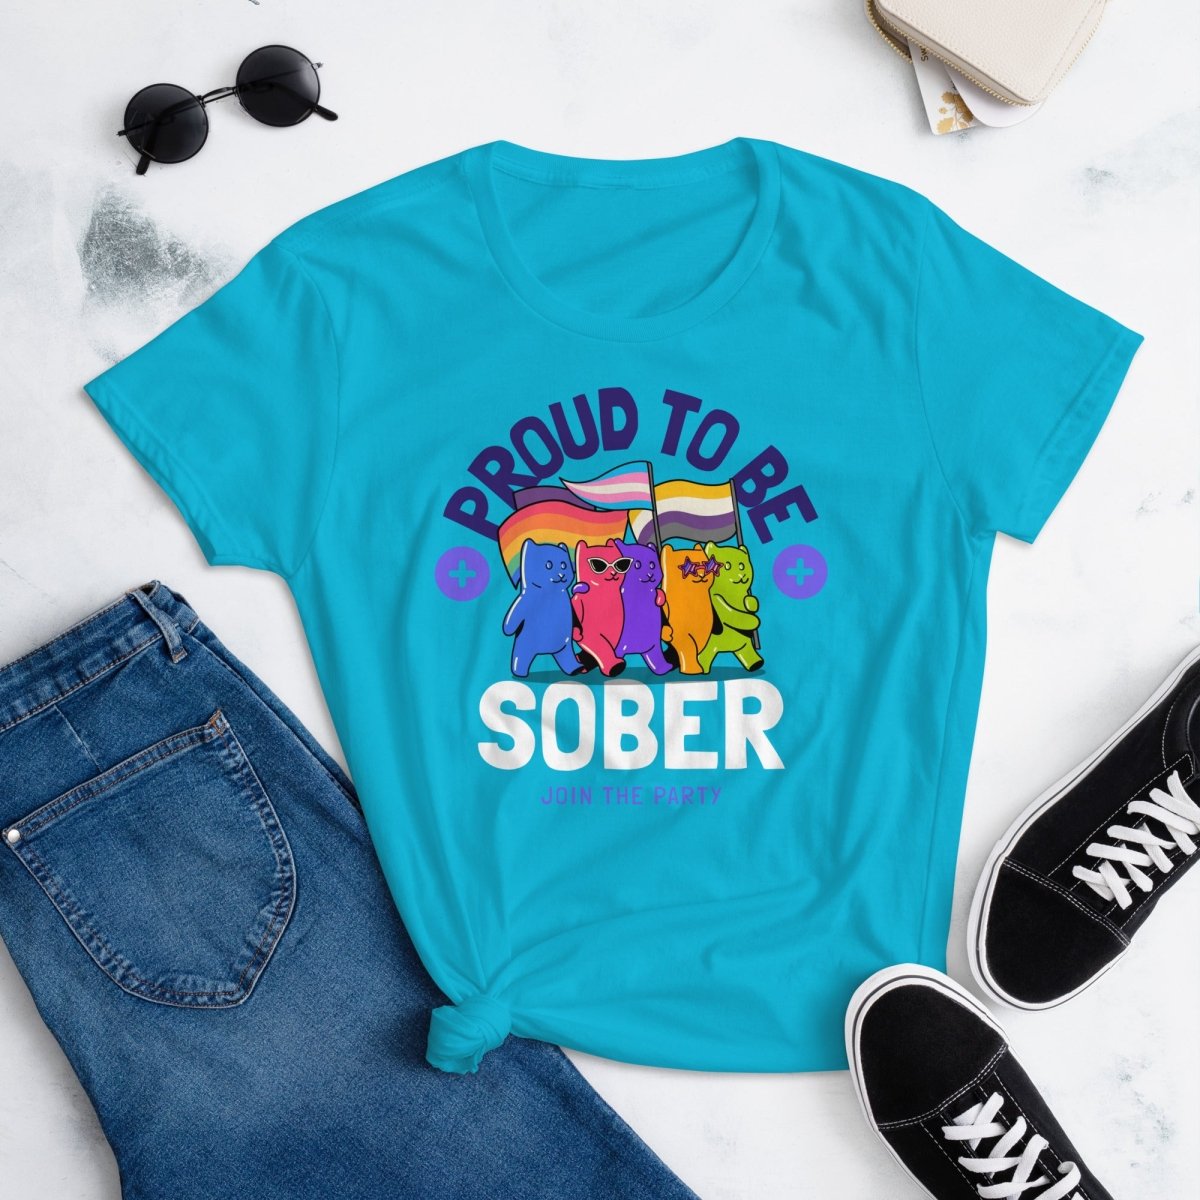 "Proud to be Sober" Women's Fashion Tee - Rainbow Resilience Collection - Caribbean Blue / S | Sobervation